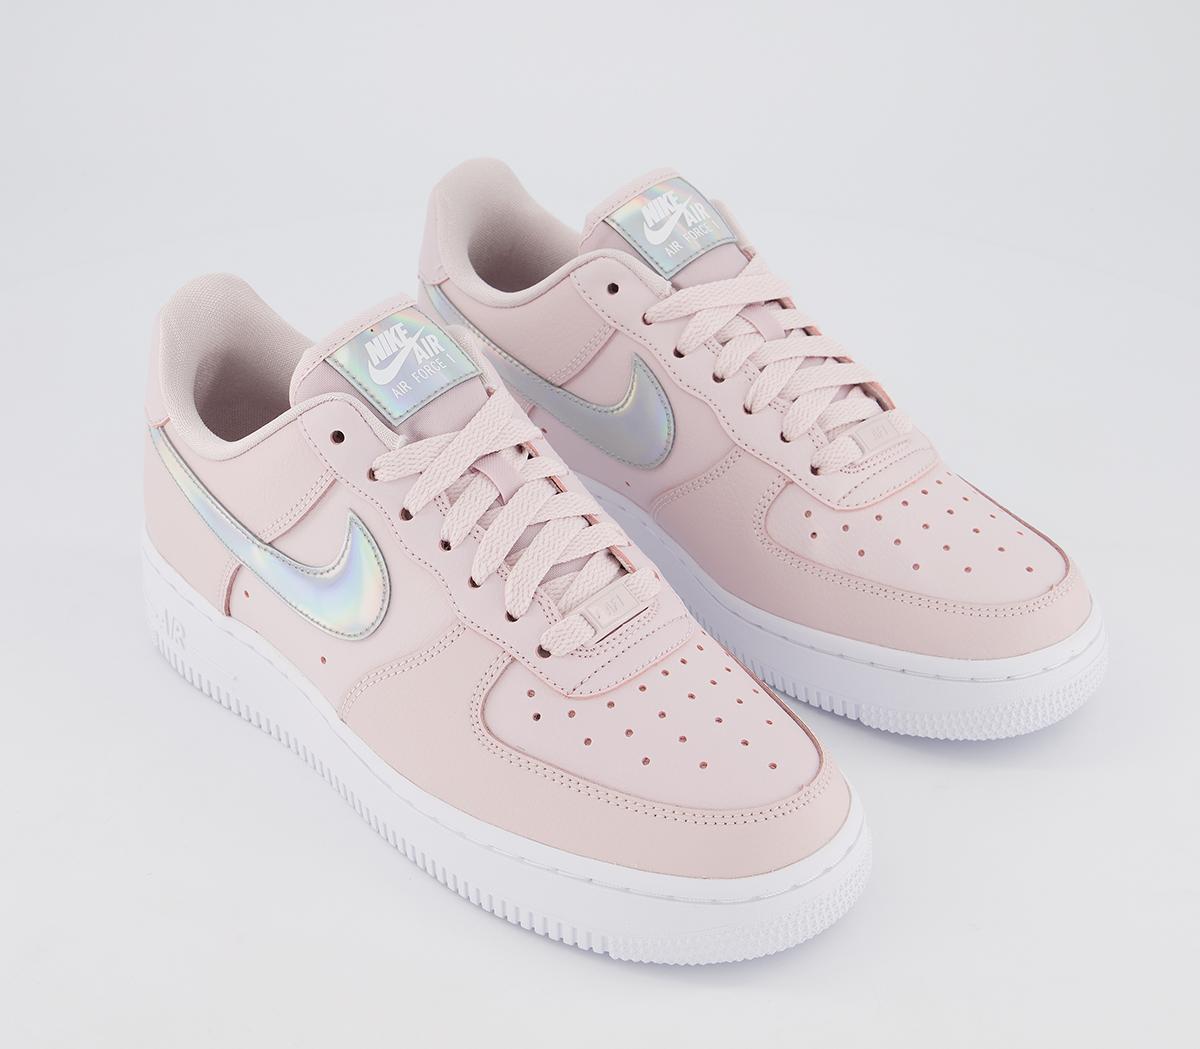 Nike Air Force 1 07 Trainers Barely Rose Irridescent White F - Hers ...